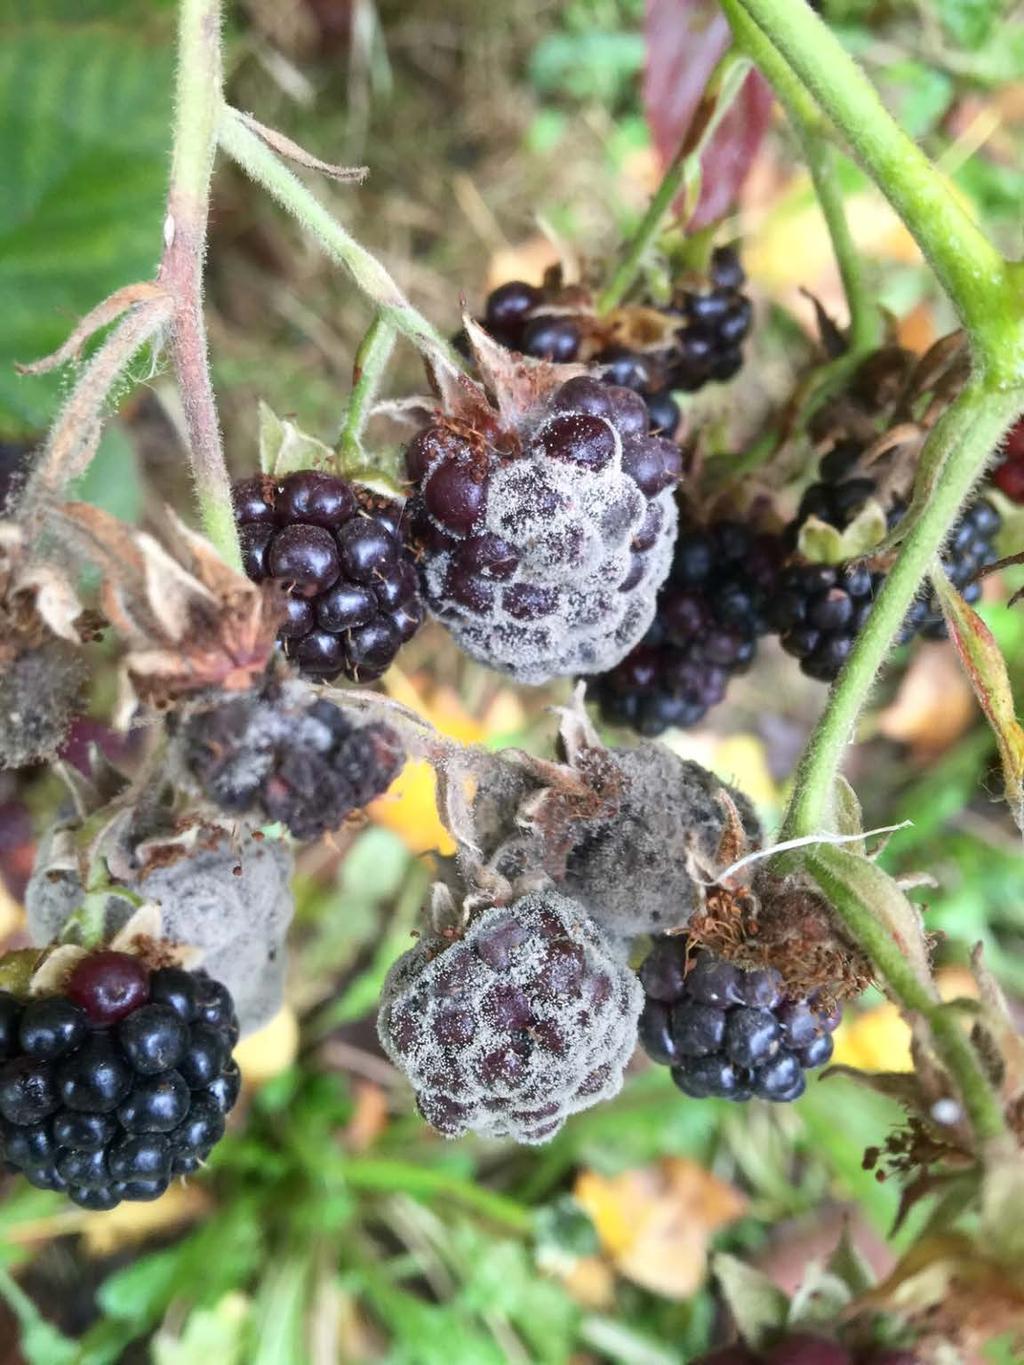 Cross resistance of new FRAC 7 Fungicides for Control of Gray Mold in Berries in PNW Tobin Peever David Dutton Dalphy Harteveld Olga